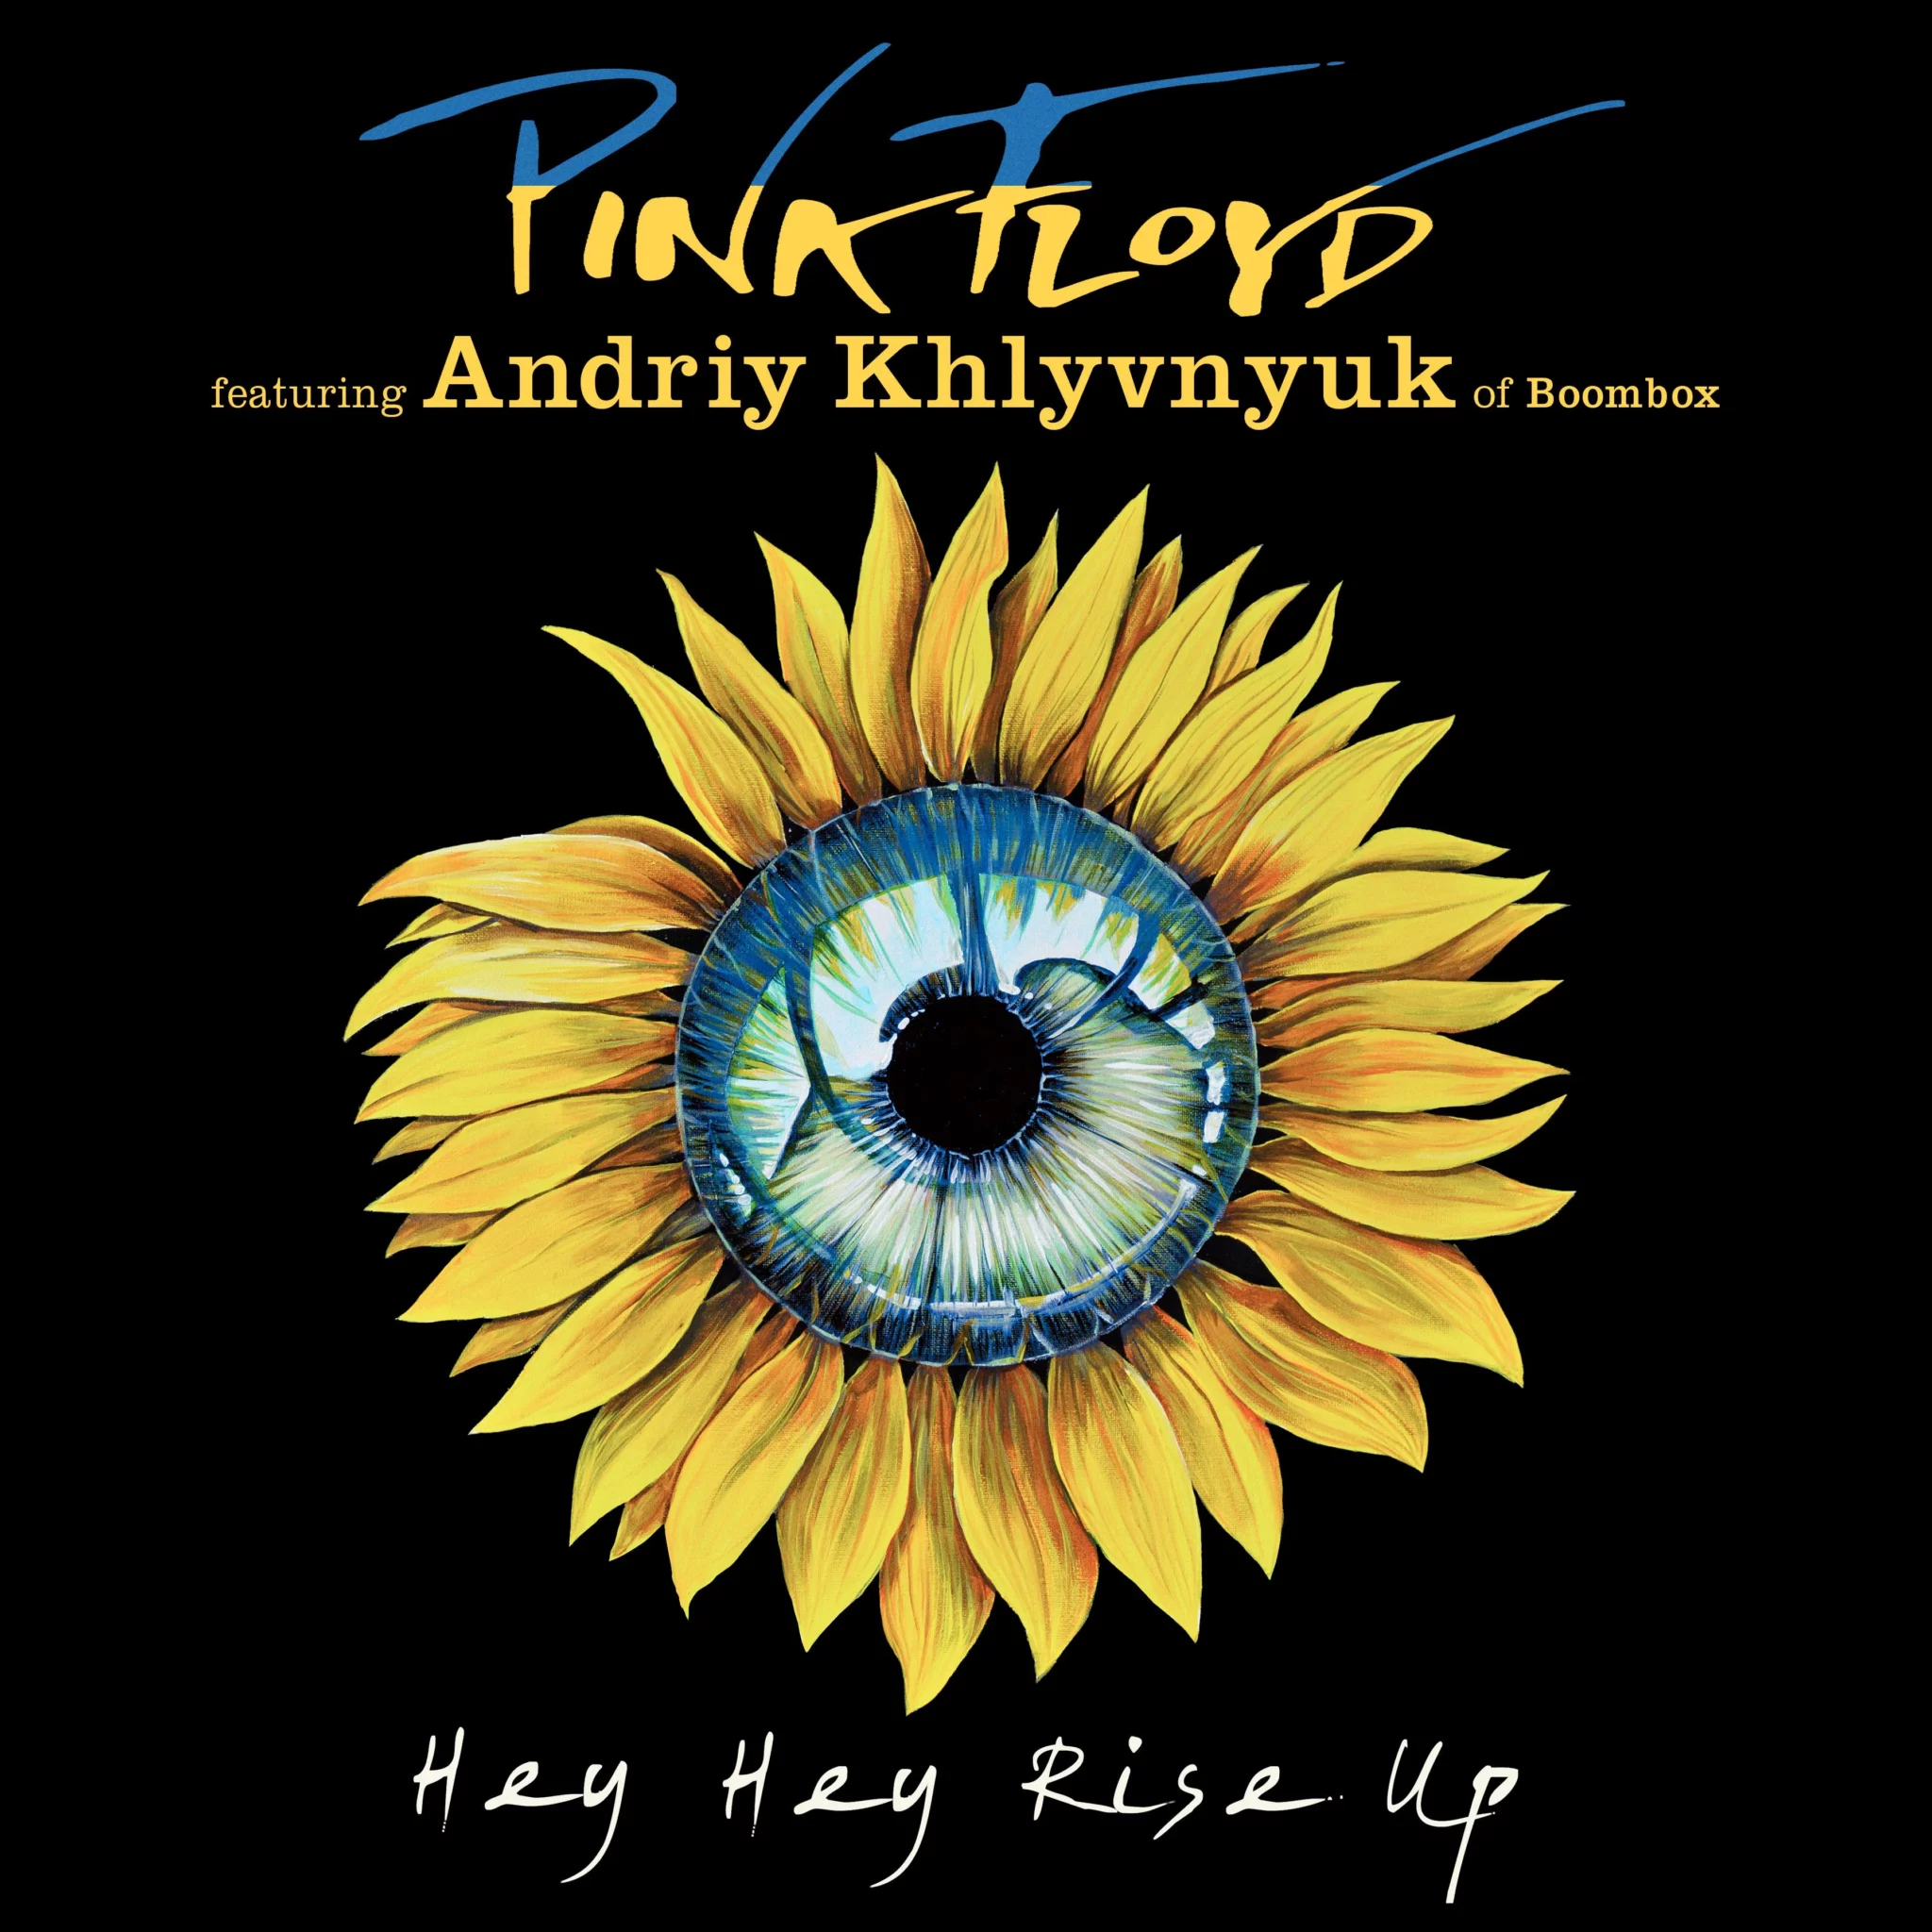 Artwork for the song with a sunflower, which is the national flower of Ukraine.